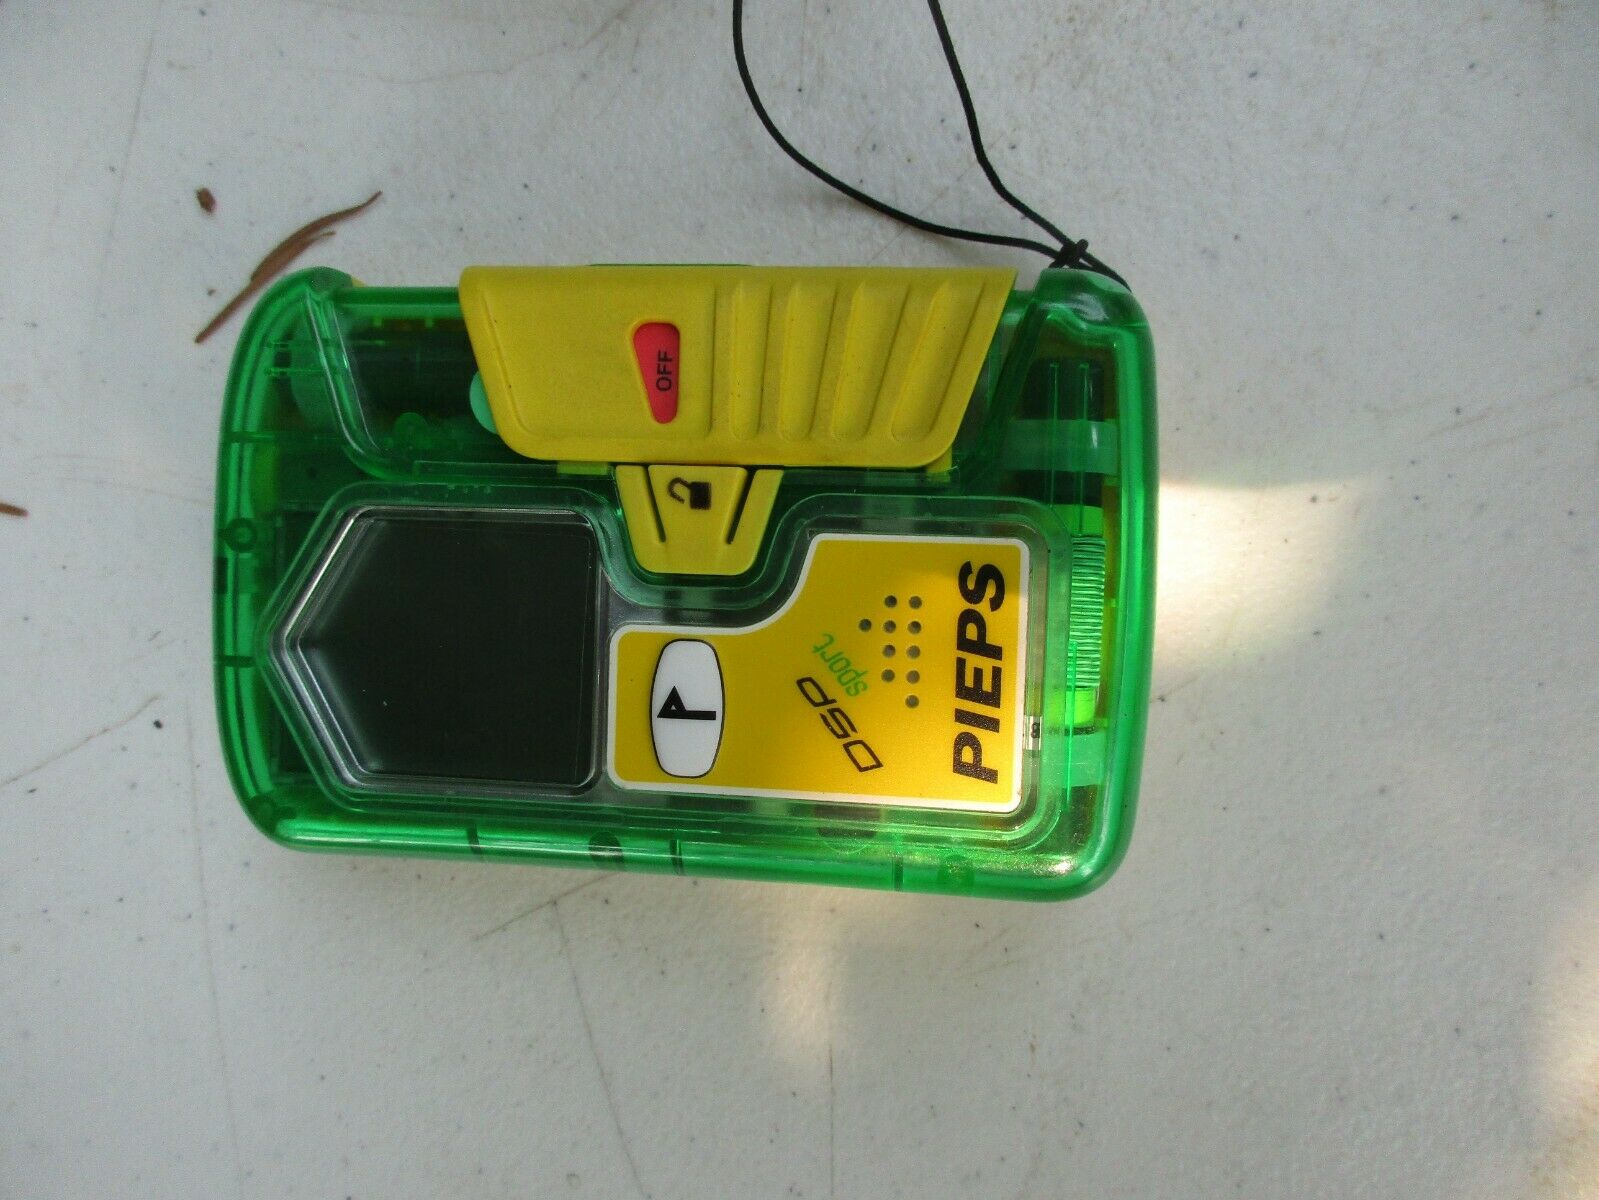 Pieps Dsp Sport Beacon With Hard Case